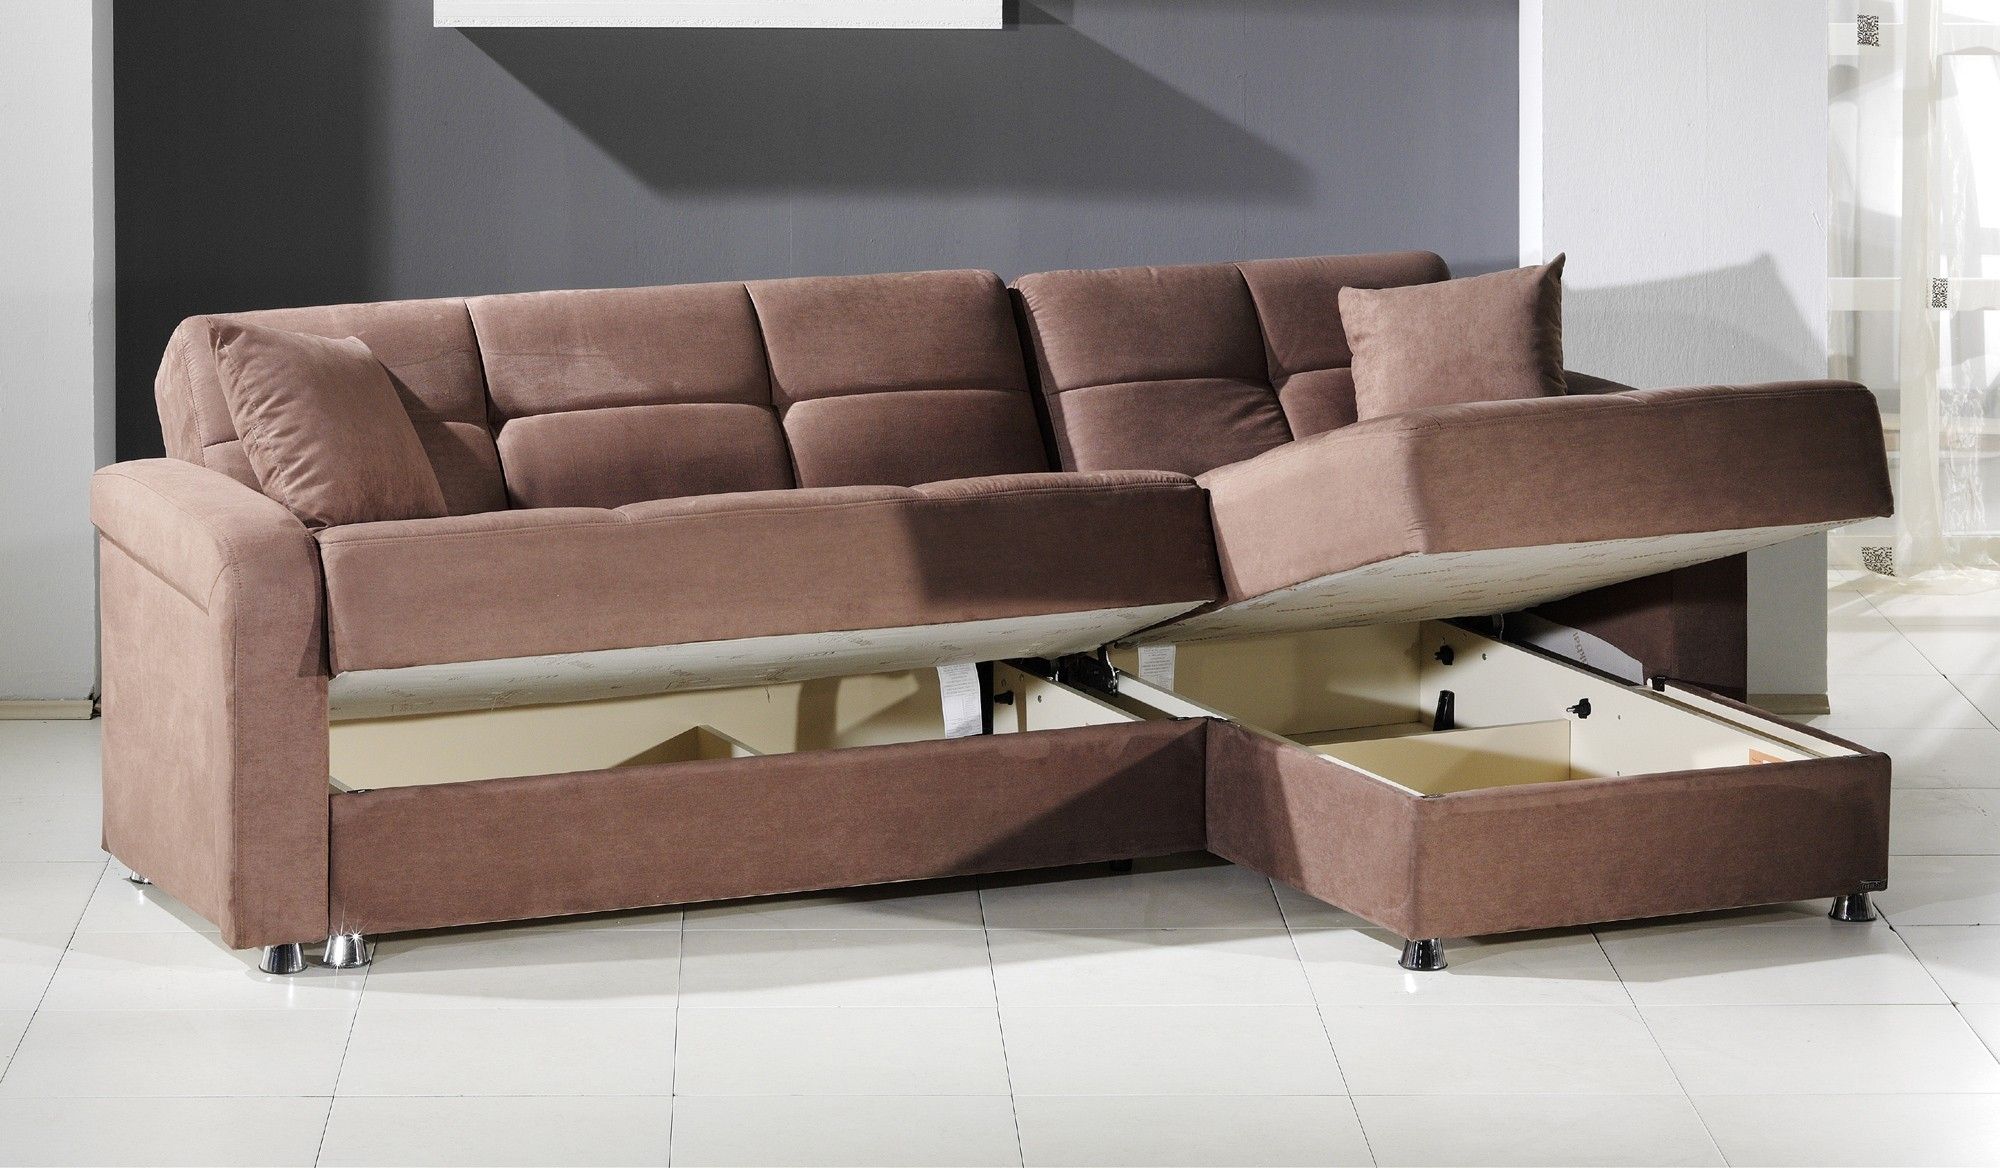 Attractive Sectional Sofas With Storage 48 For Your Abson Living In Abbyson Living Charlotte Beige Sectional Sofa And Ottoman 